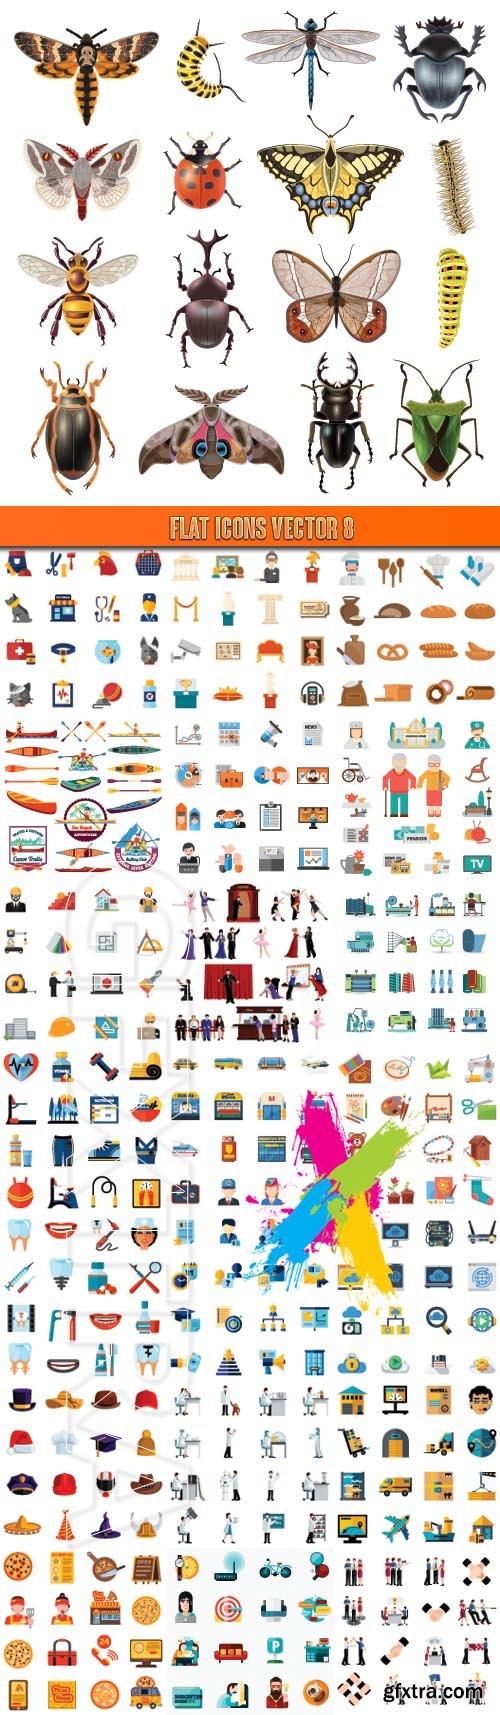 Flat icons vector 8